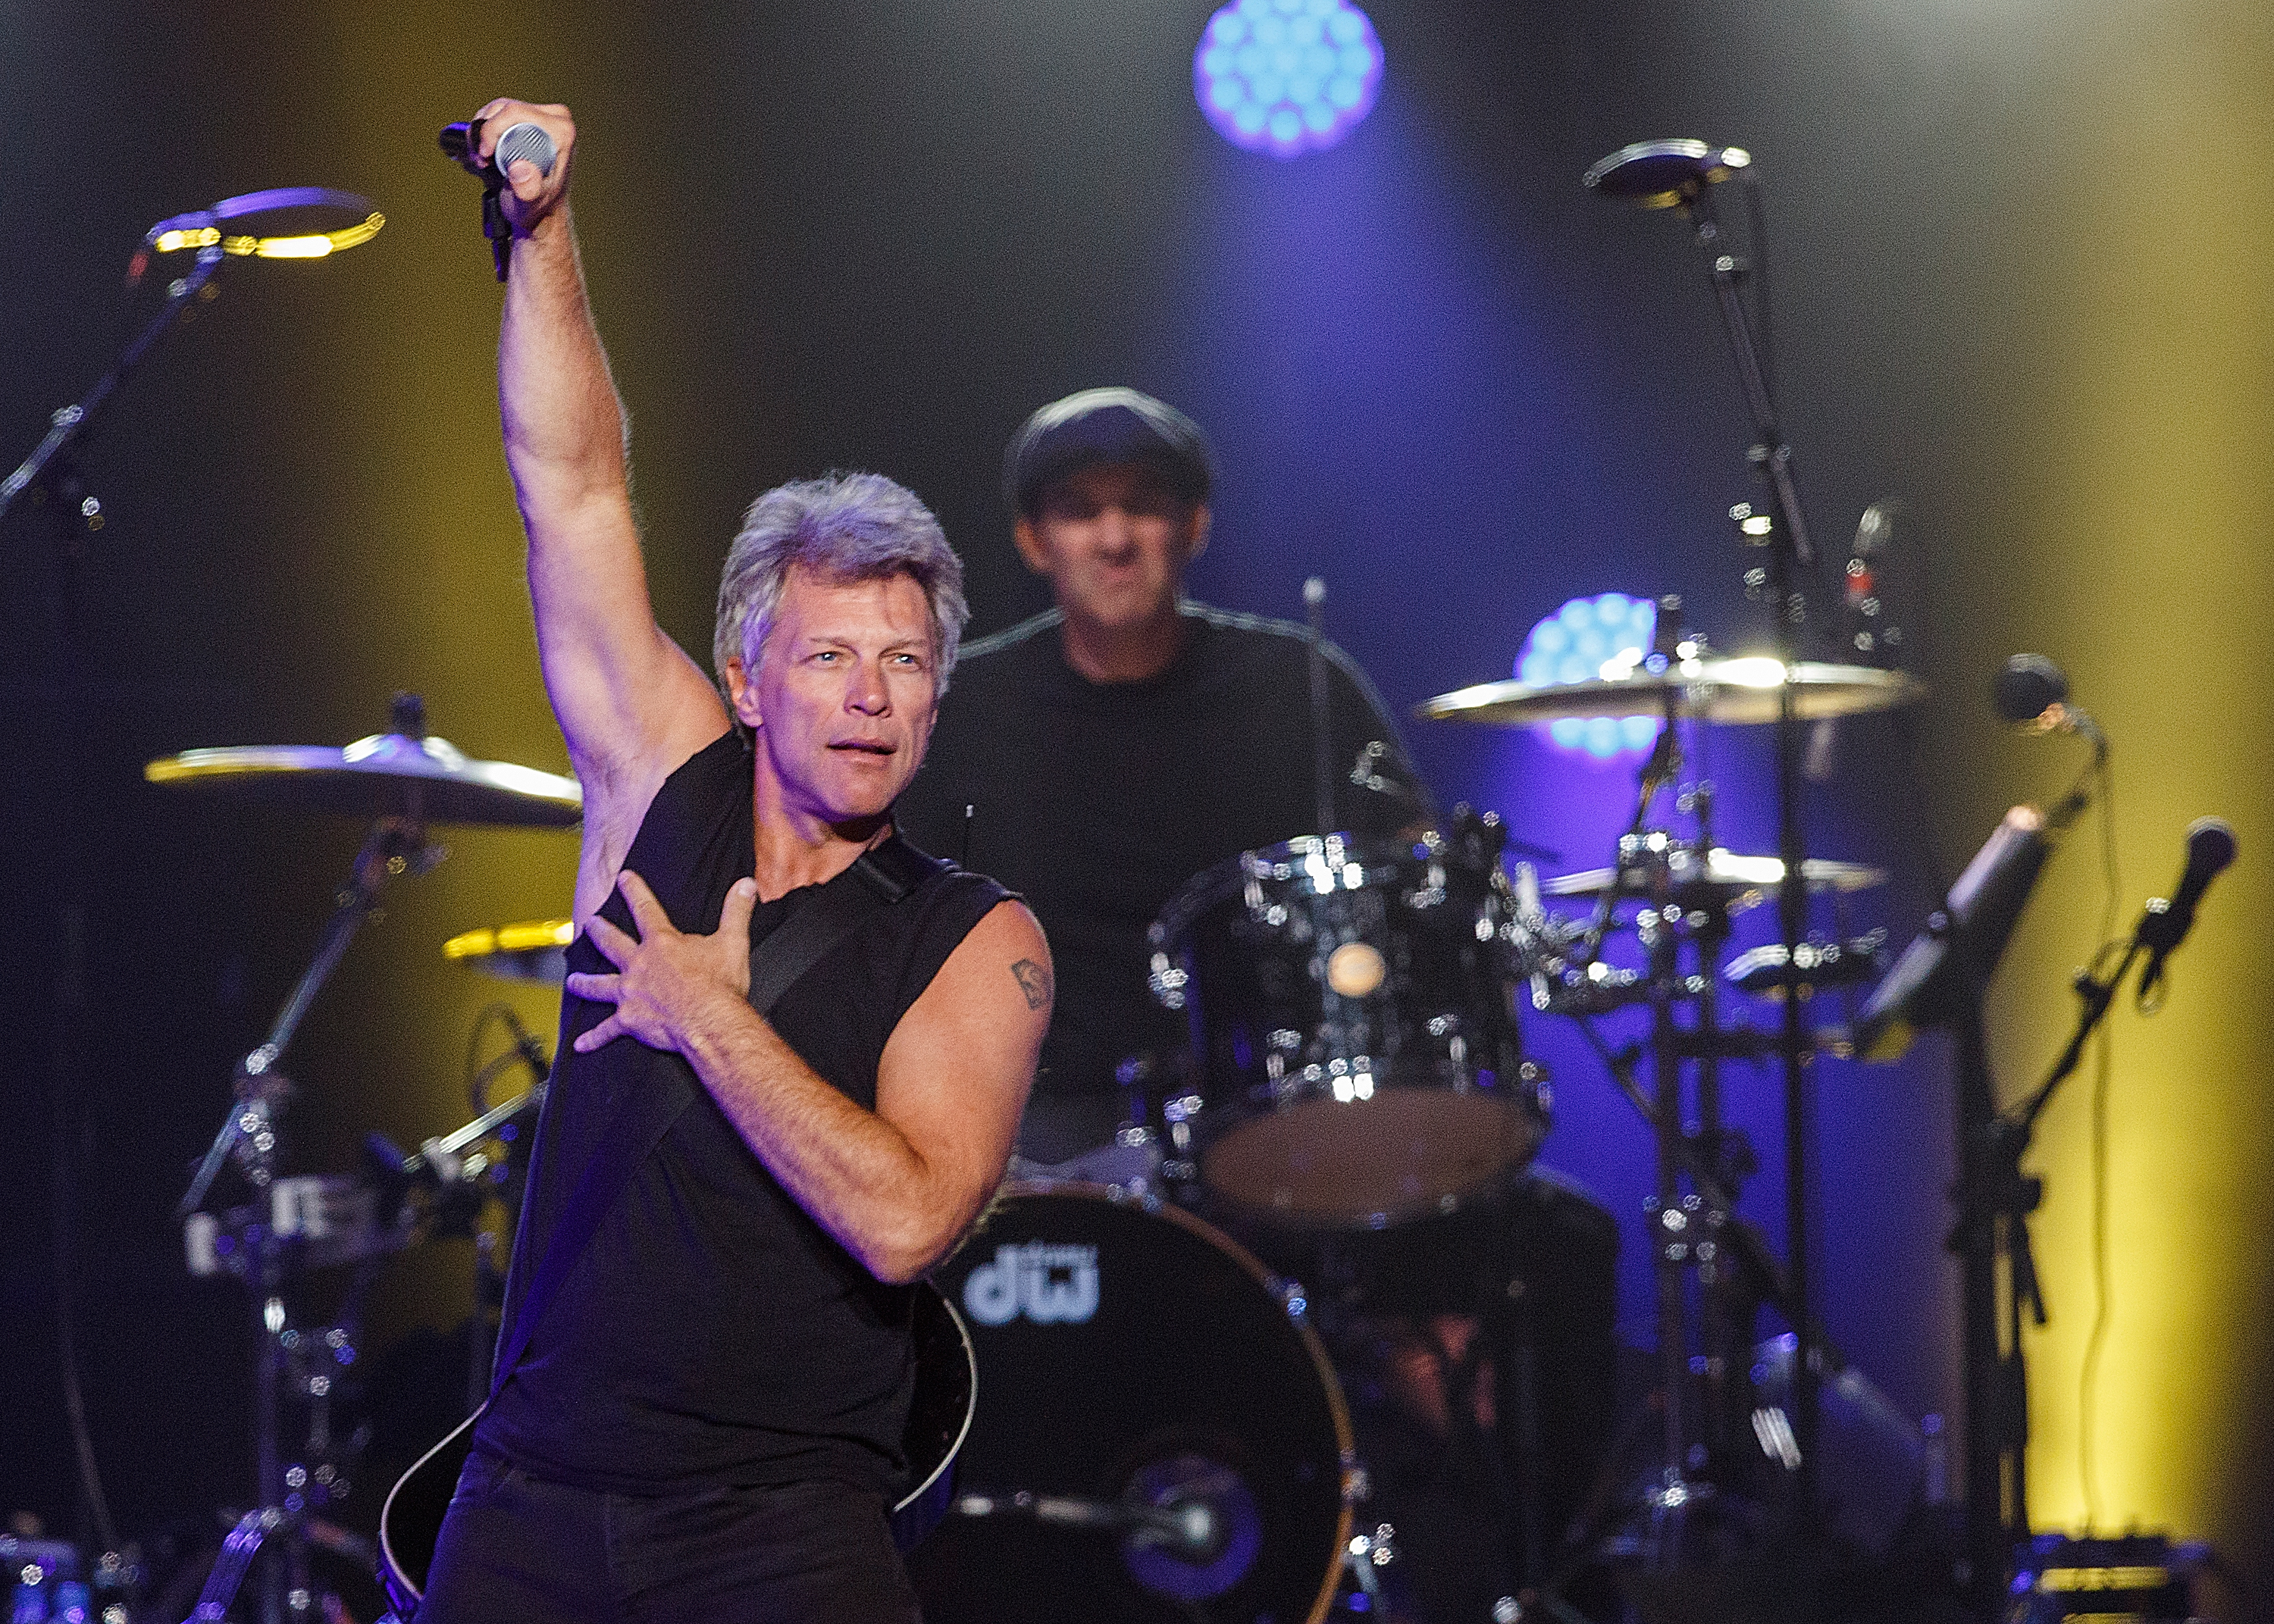 Musician Jon Bon Jovi of Bon Jovi performs onstage at Rogers Arena on August 22, 2015 in Vancouver, Canada.